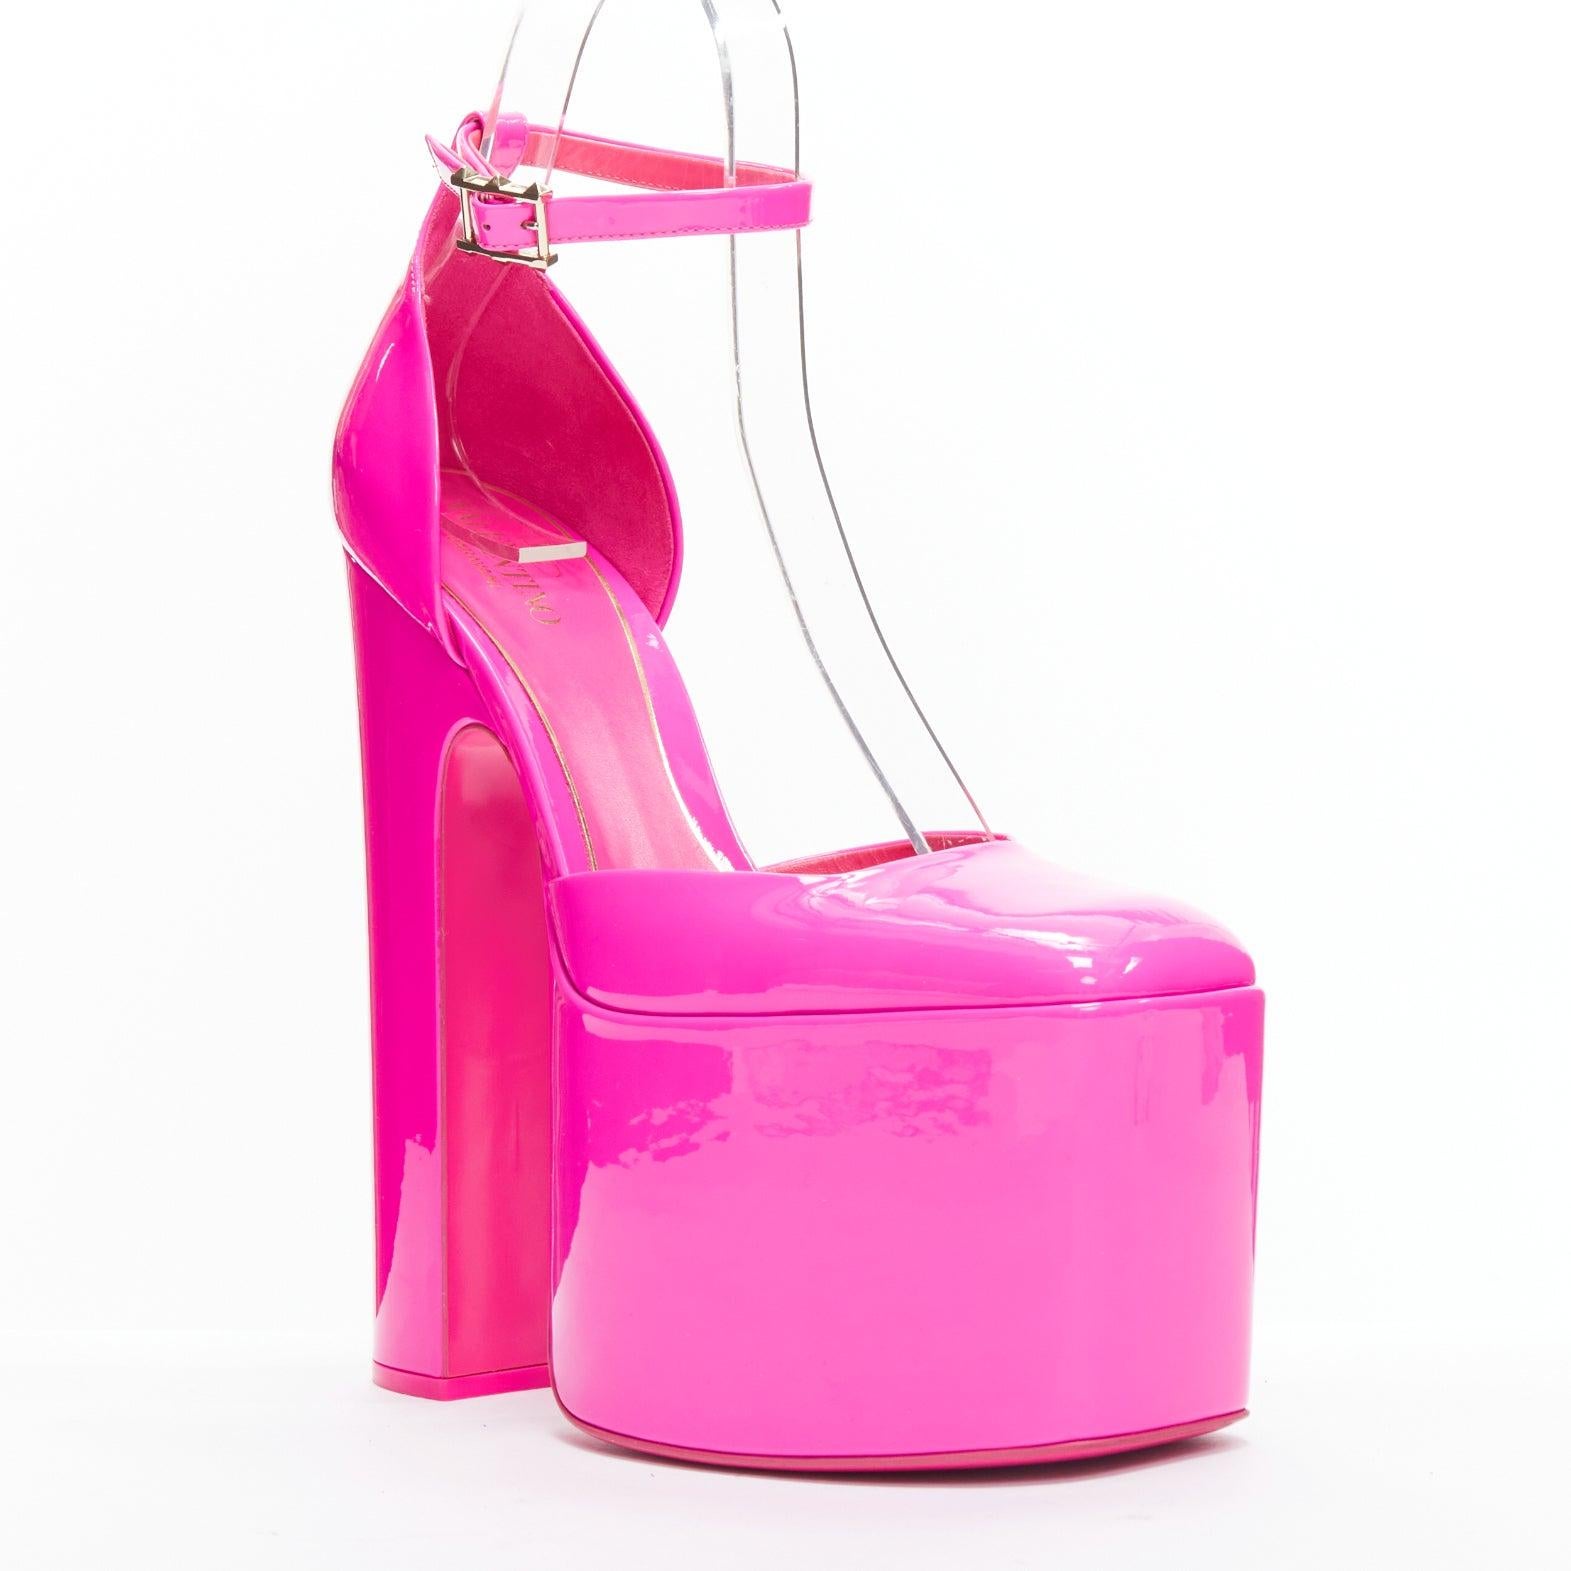 VALENTINO Runway Discobox 180 hot pink patent platform ankle strap heels EU39
Reference: AAWC/A00550
Brand: Valentino
Designer: Pier Paolo Piccioli
Model: Discobox 180
Collection: 2022 - Runway
Material: Patent Leather
Color: Neon Pink
Pattern: